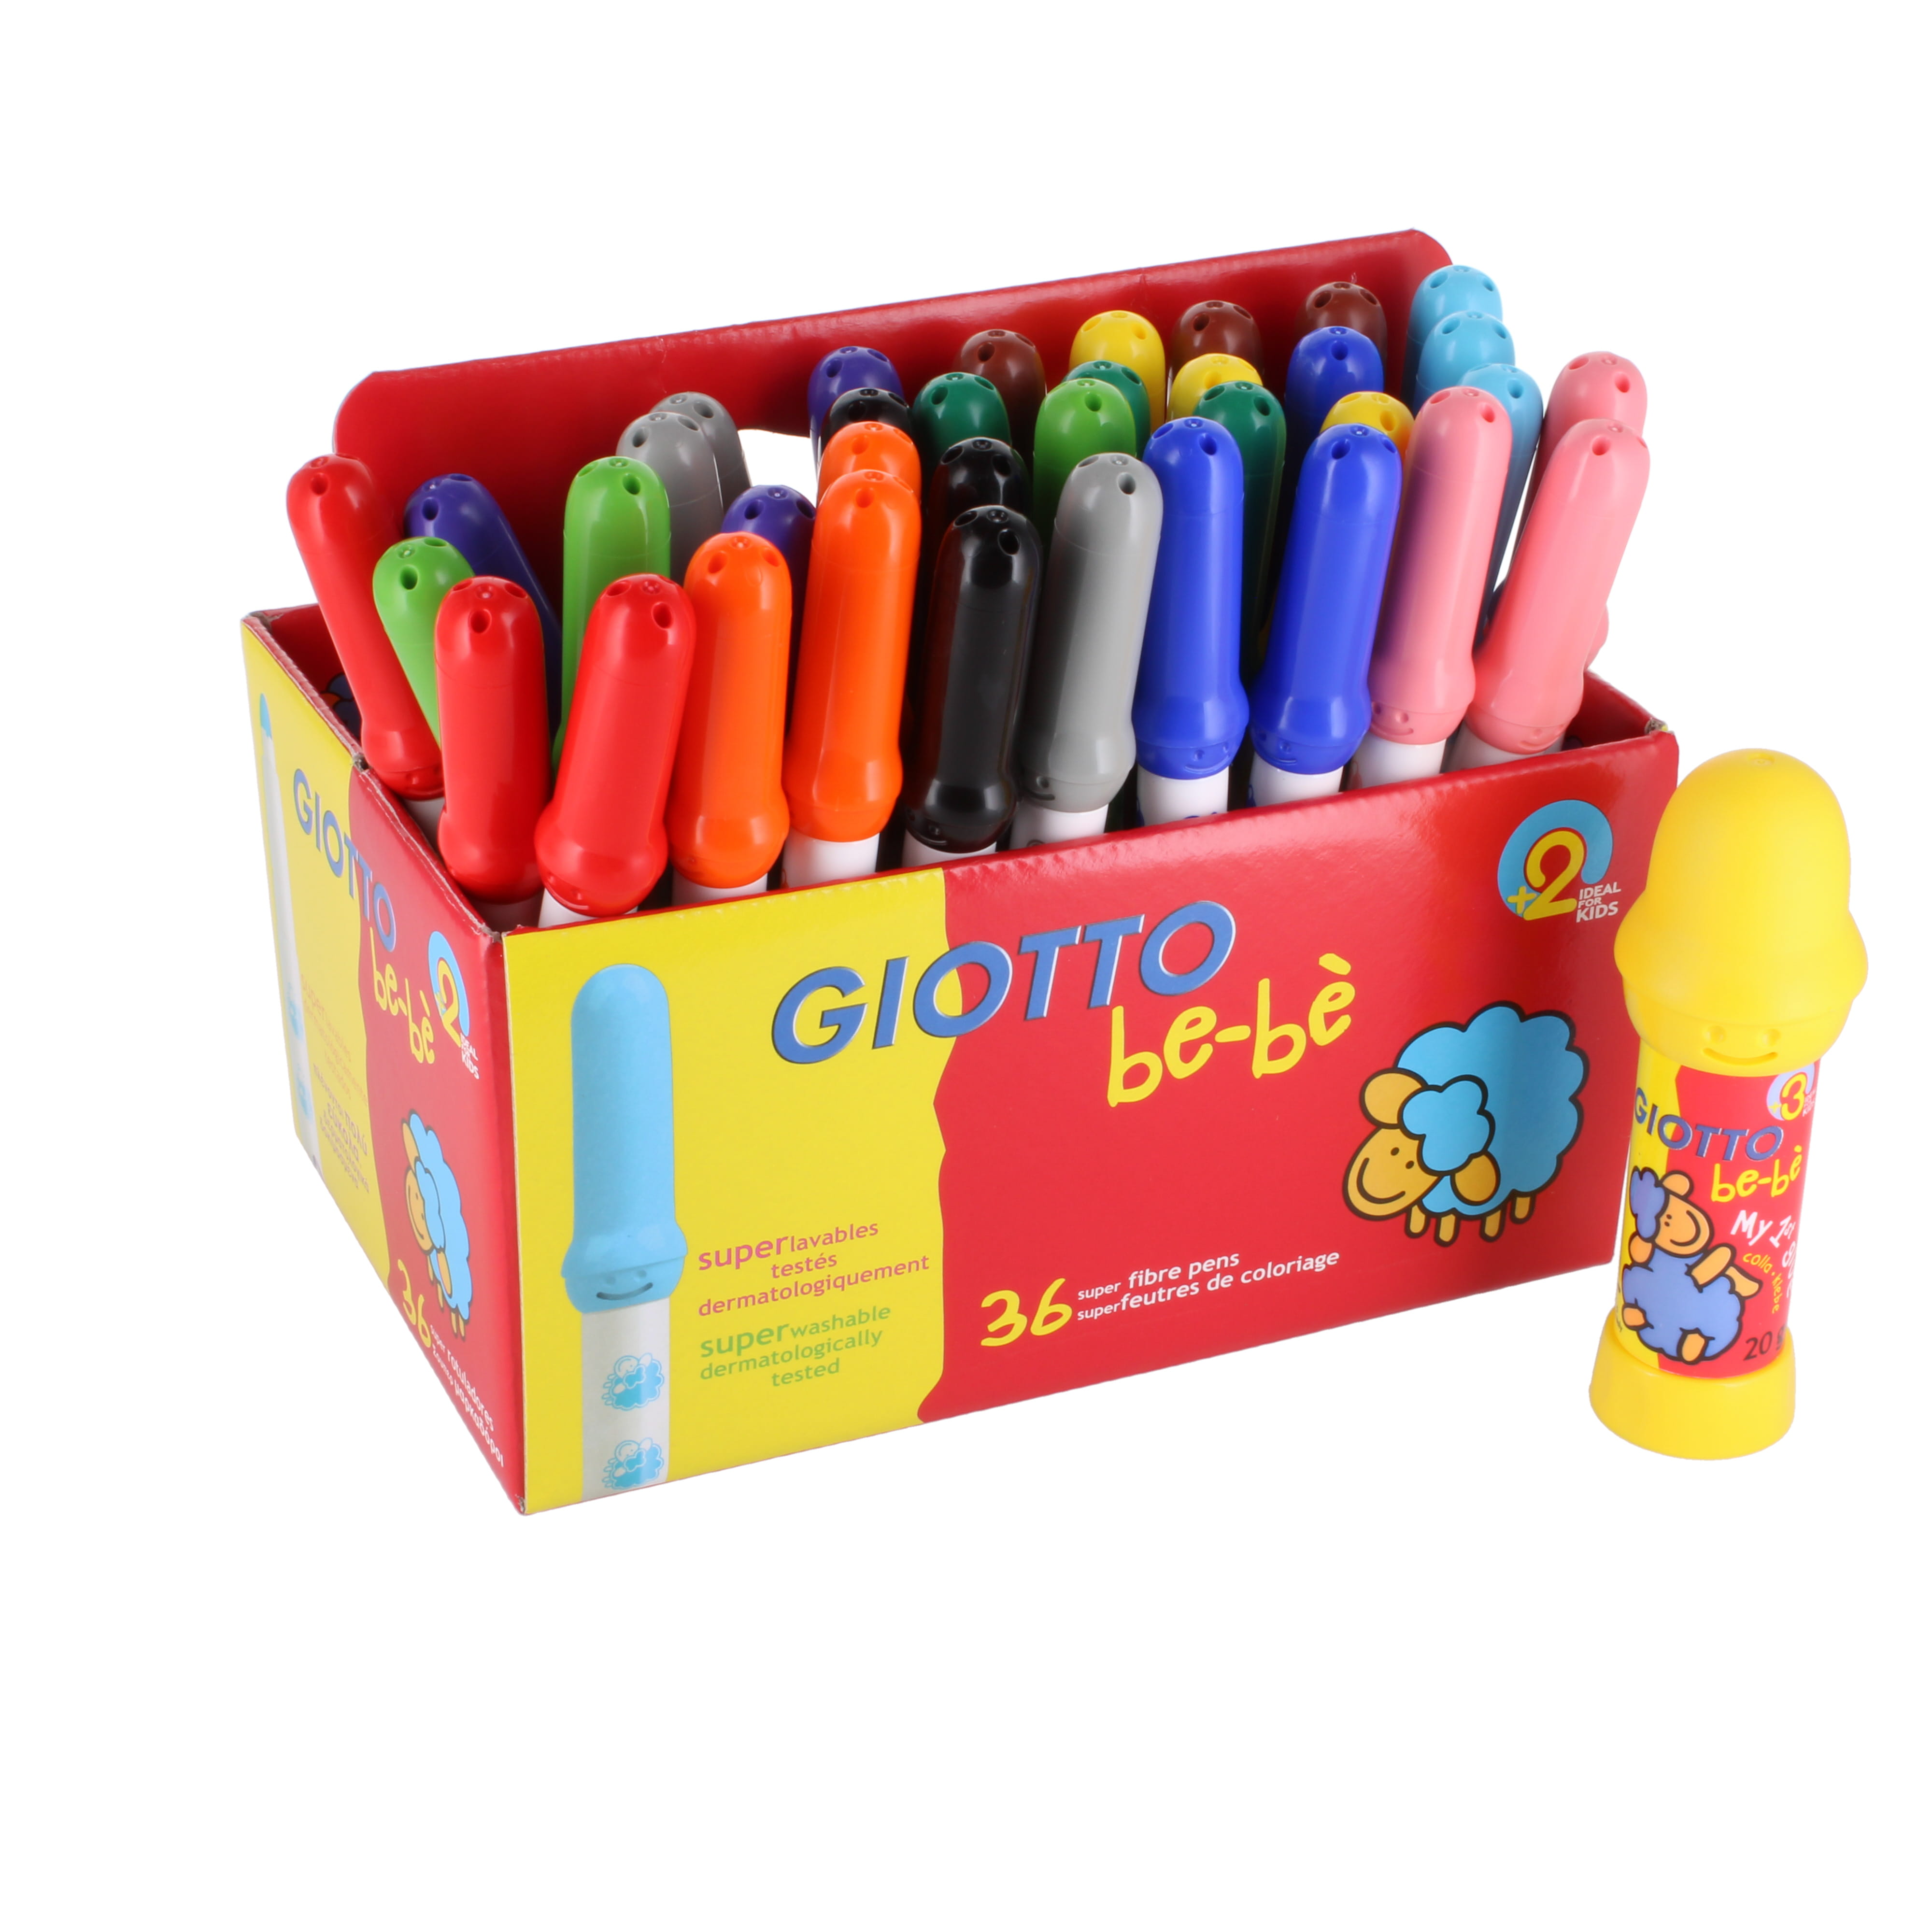 Giotto Be-Be' Super Washable Colouring Pens - pack of 36